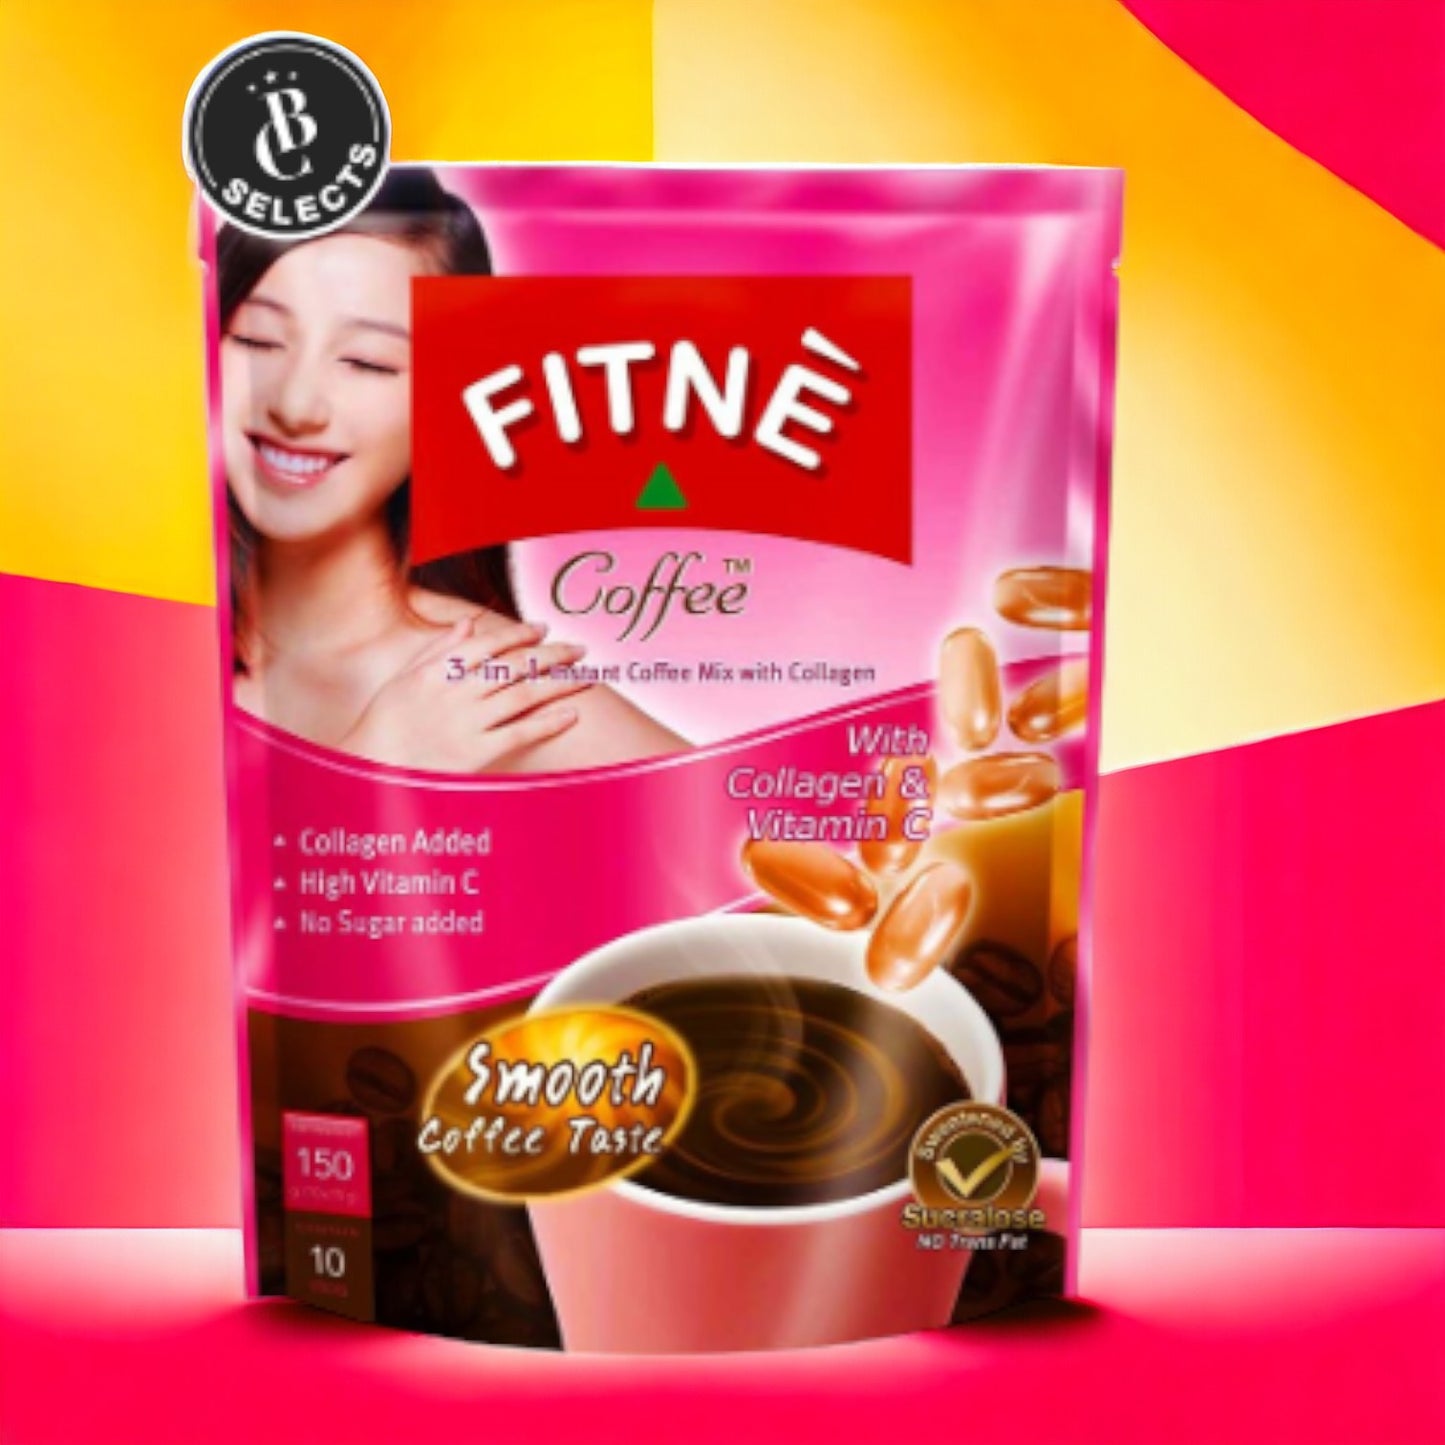 Fitné Diet Coffee 3 in 1 with Collagen and Vitamin C 150g